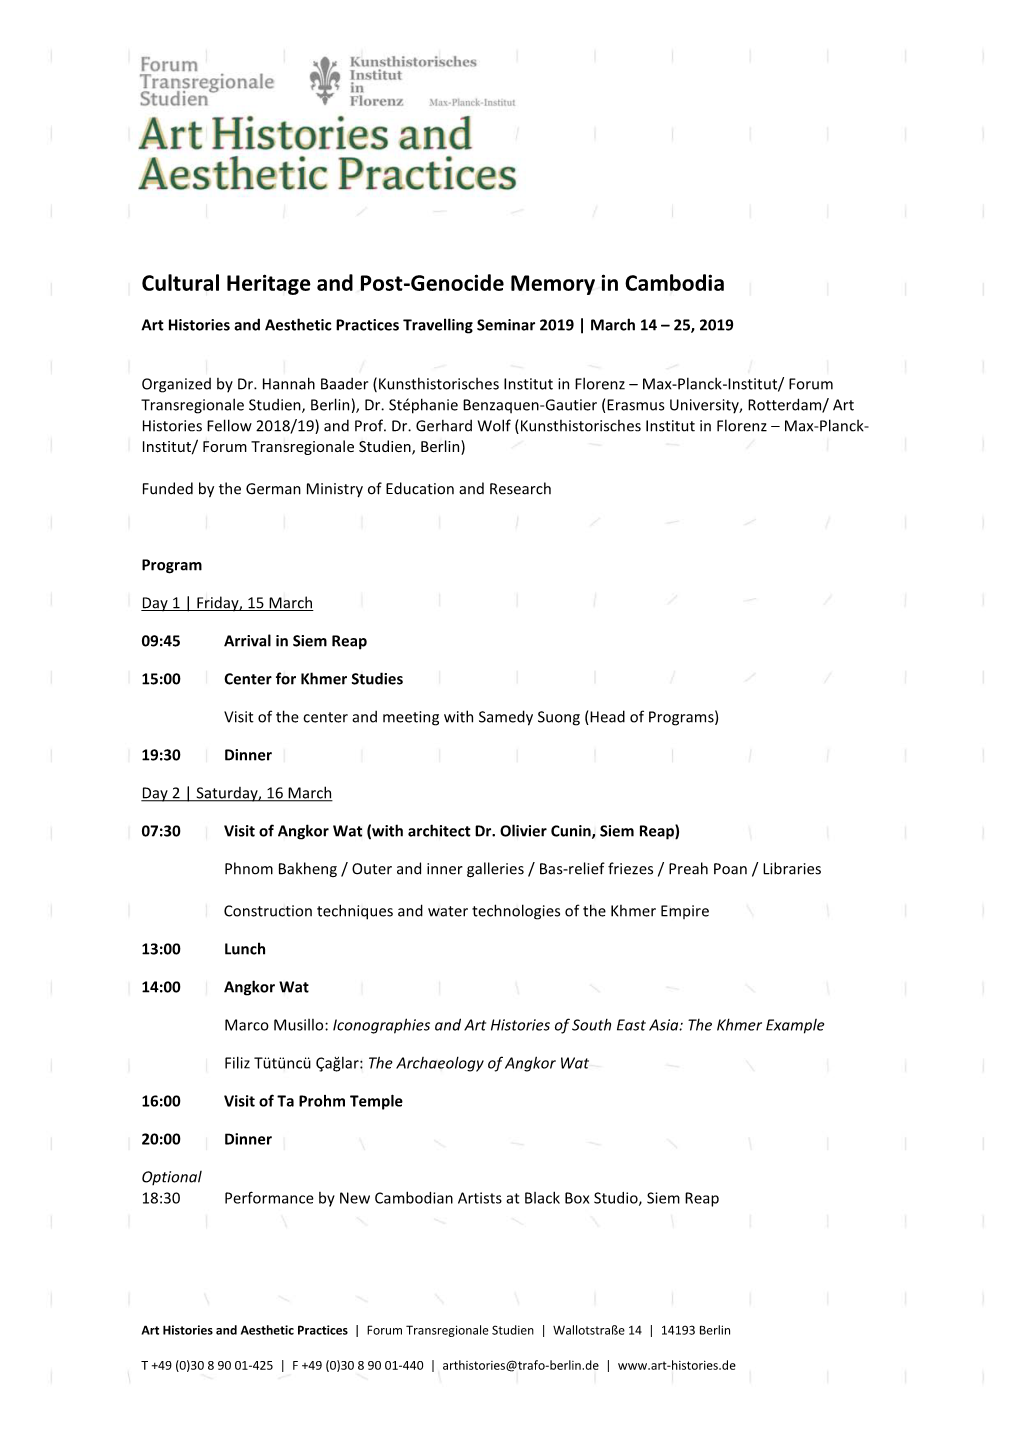 Cultural Heritage and Post-Genocide Memory in Cambodia